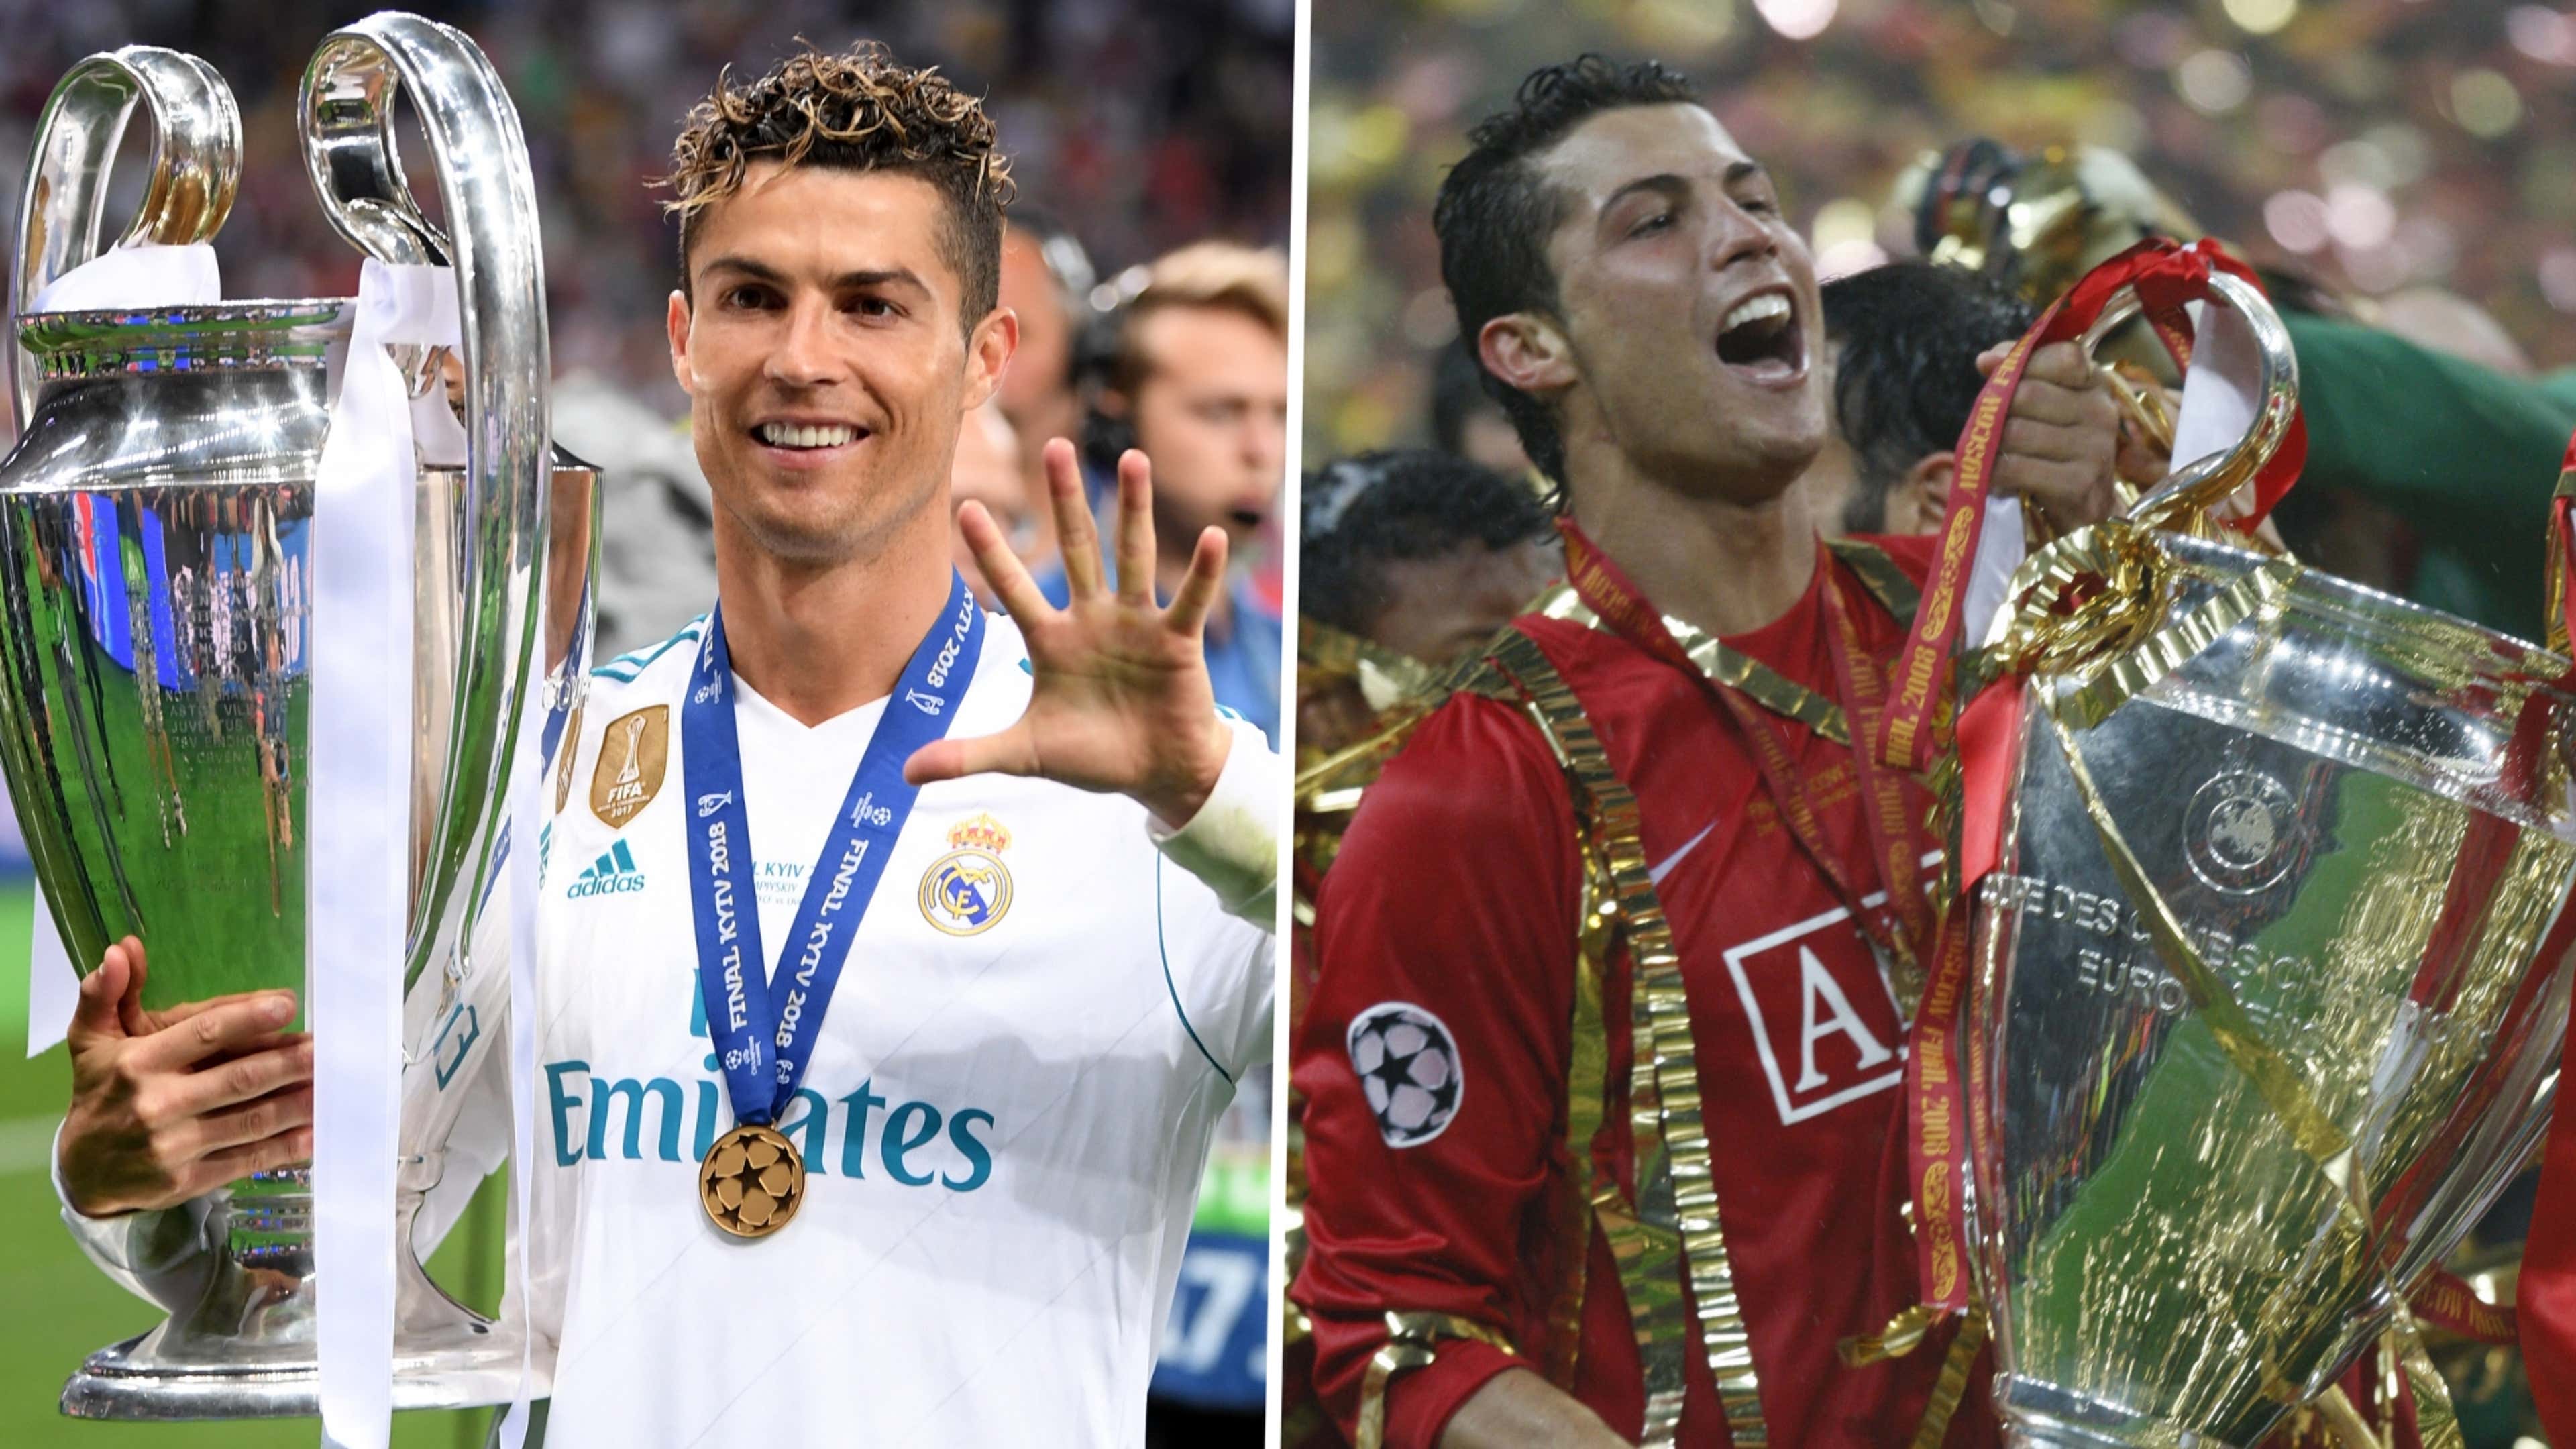  Cristiano Ronaldo celebrates scoring a goal in the 2018 Champions League final for Real Madrid against Liverpool and celebrates with the trophy after winning the 2008 Champions League final with Manchester United.